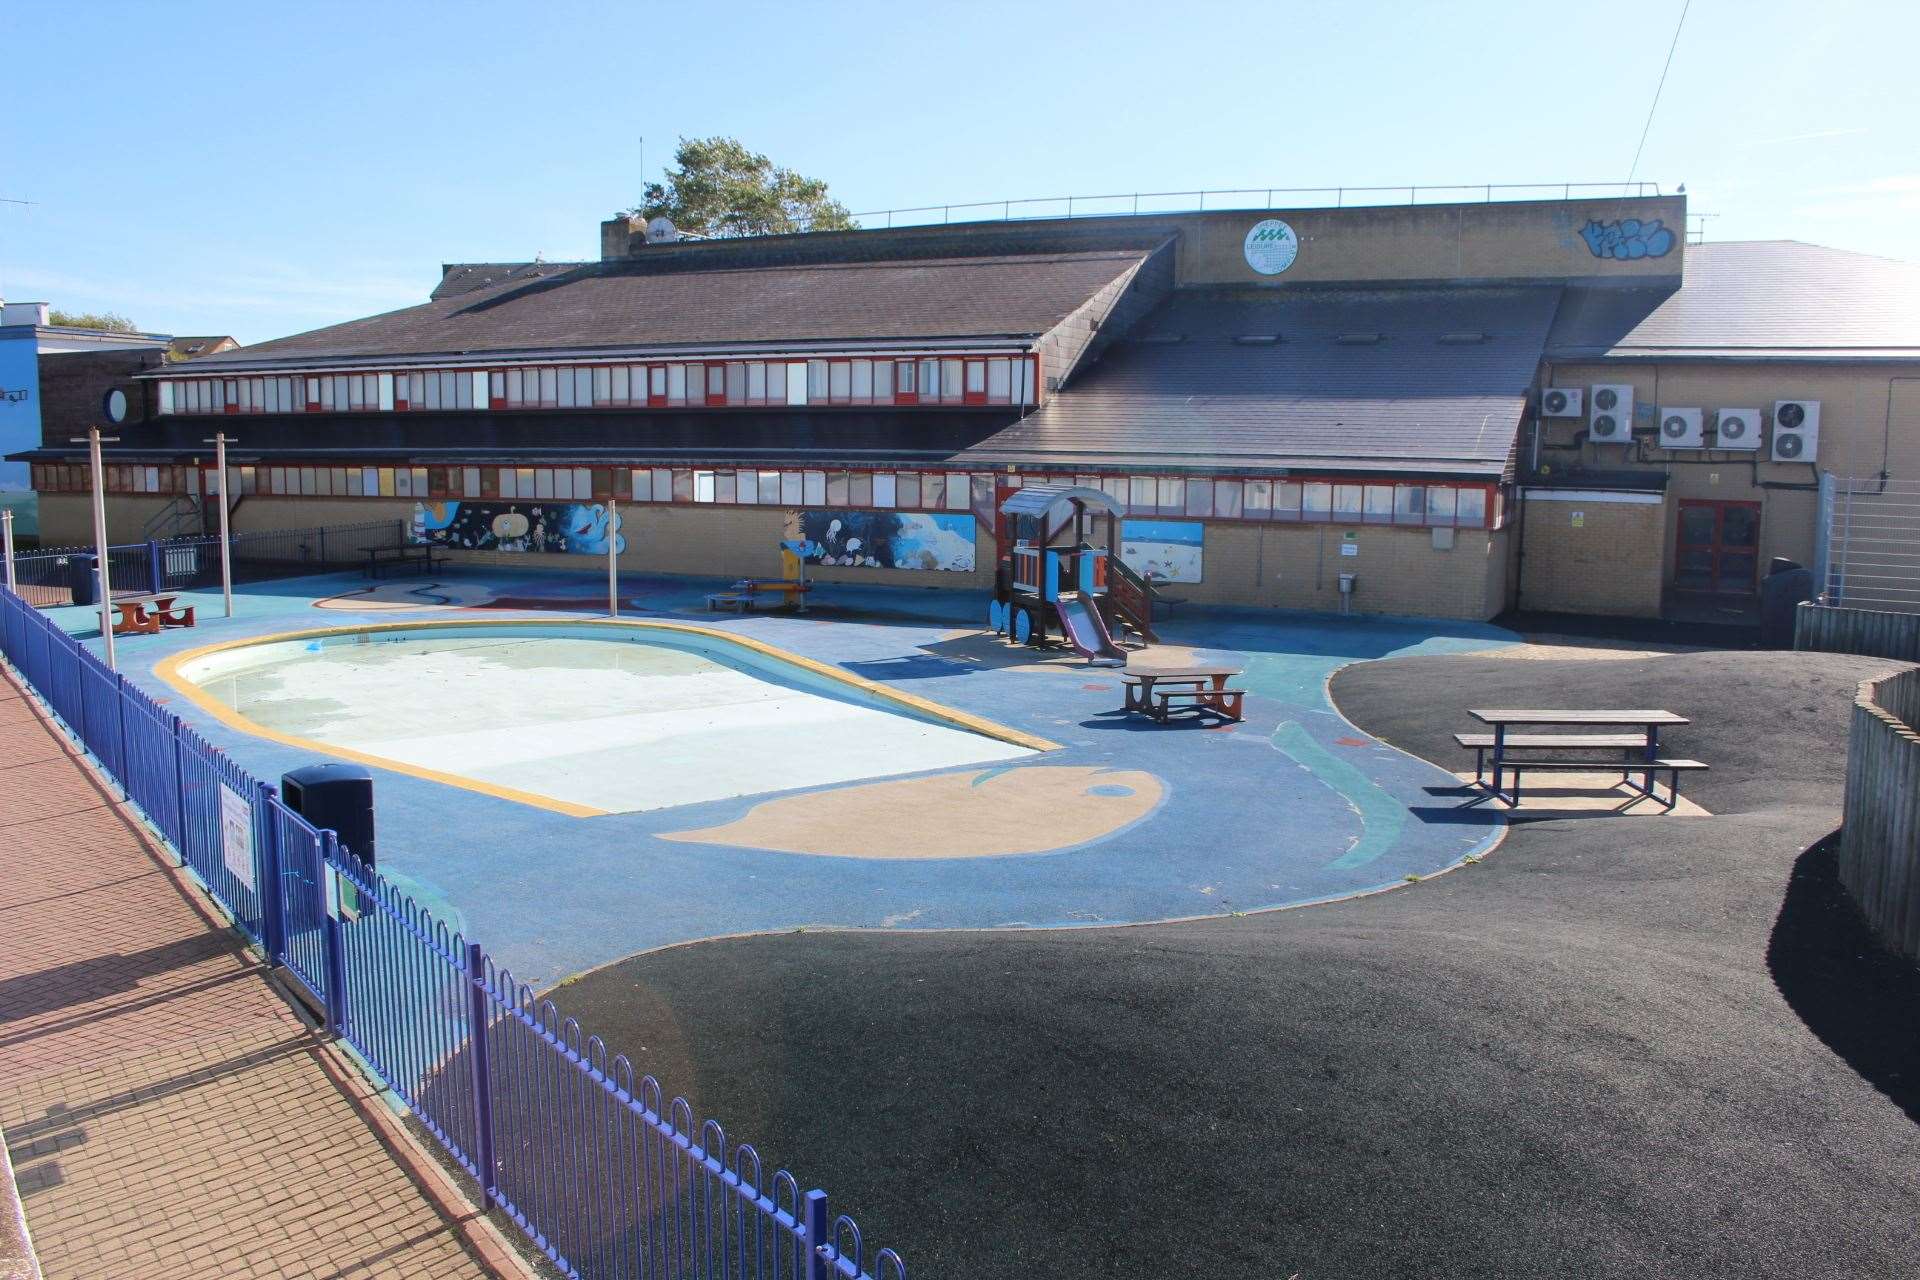 The existing paddling pool in Sheerness next to Sheppey Leisure Centre